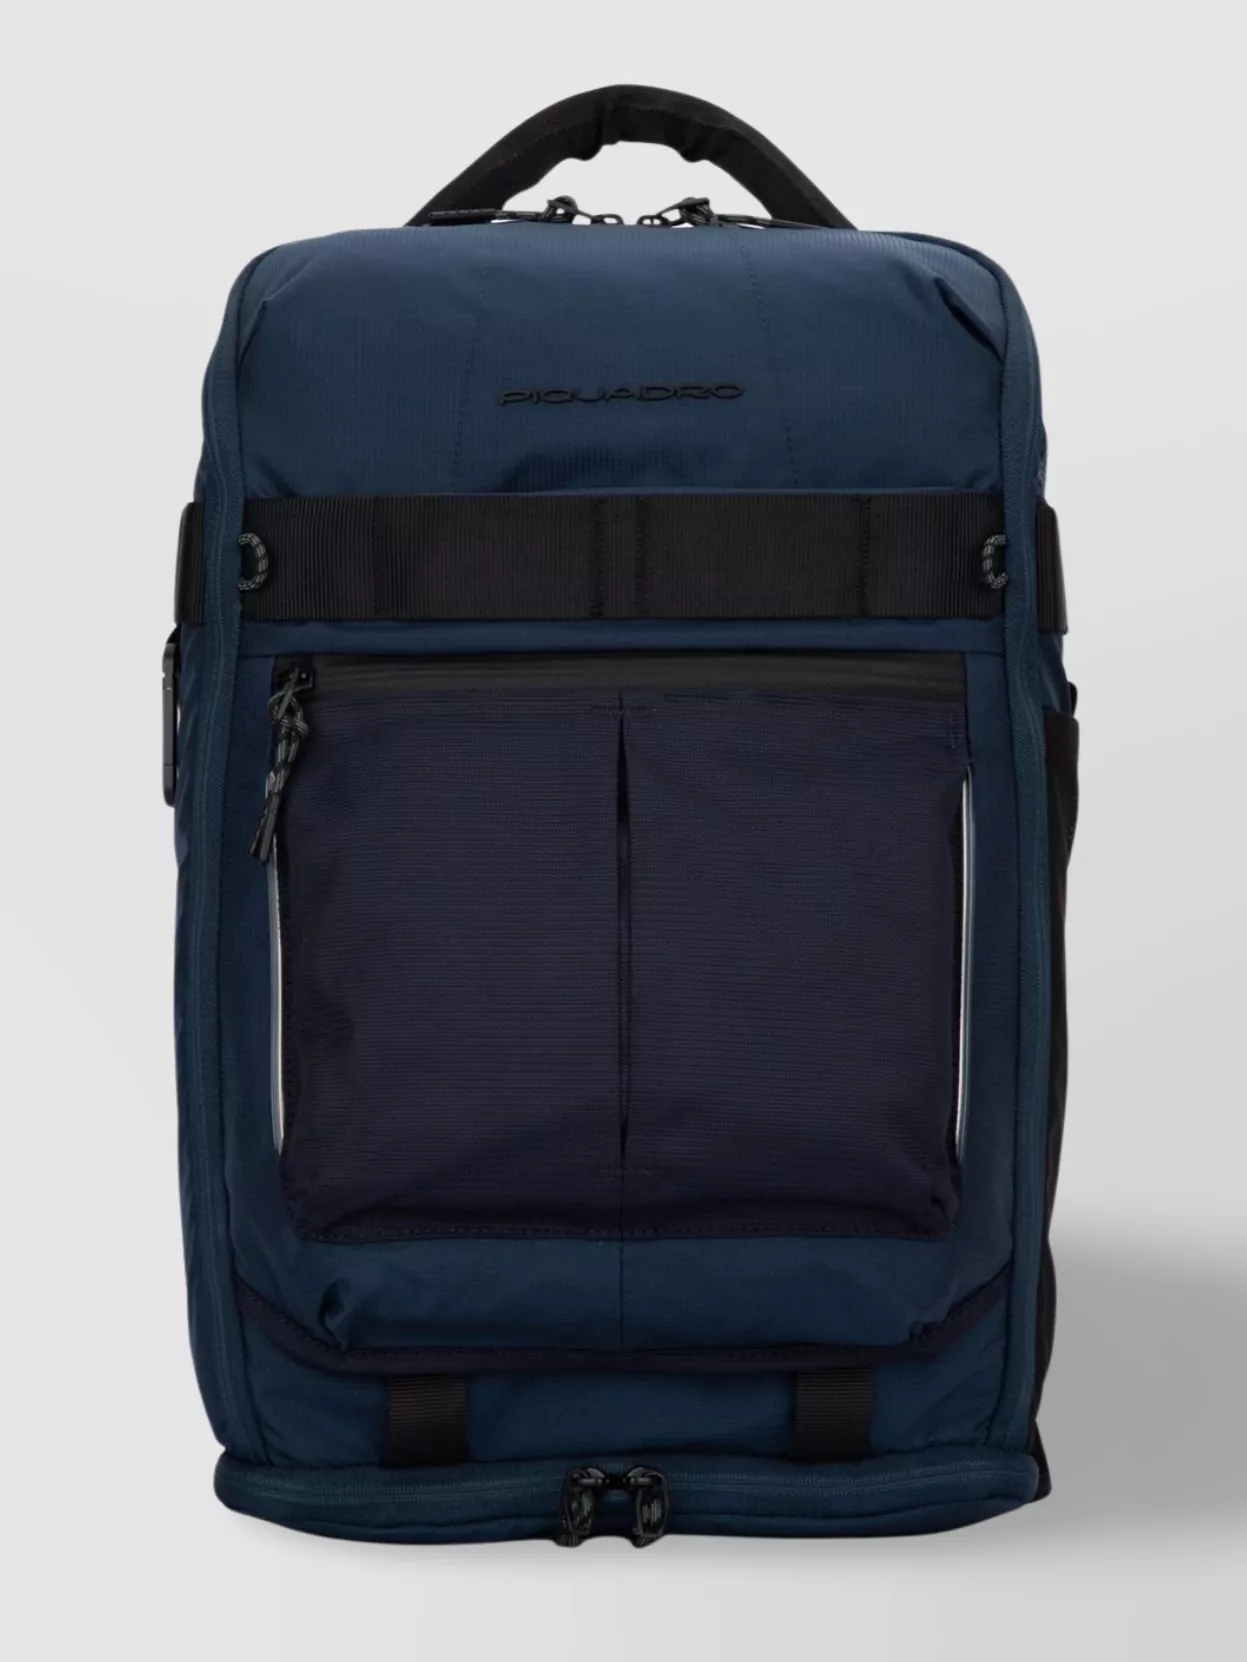 Shop Piquadro Backpack With Adjustable Straps And Front Pocket